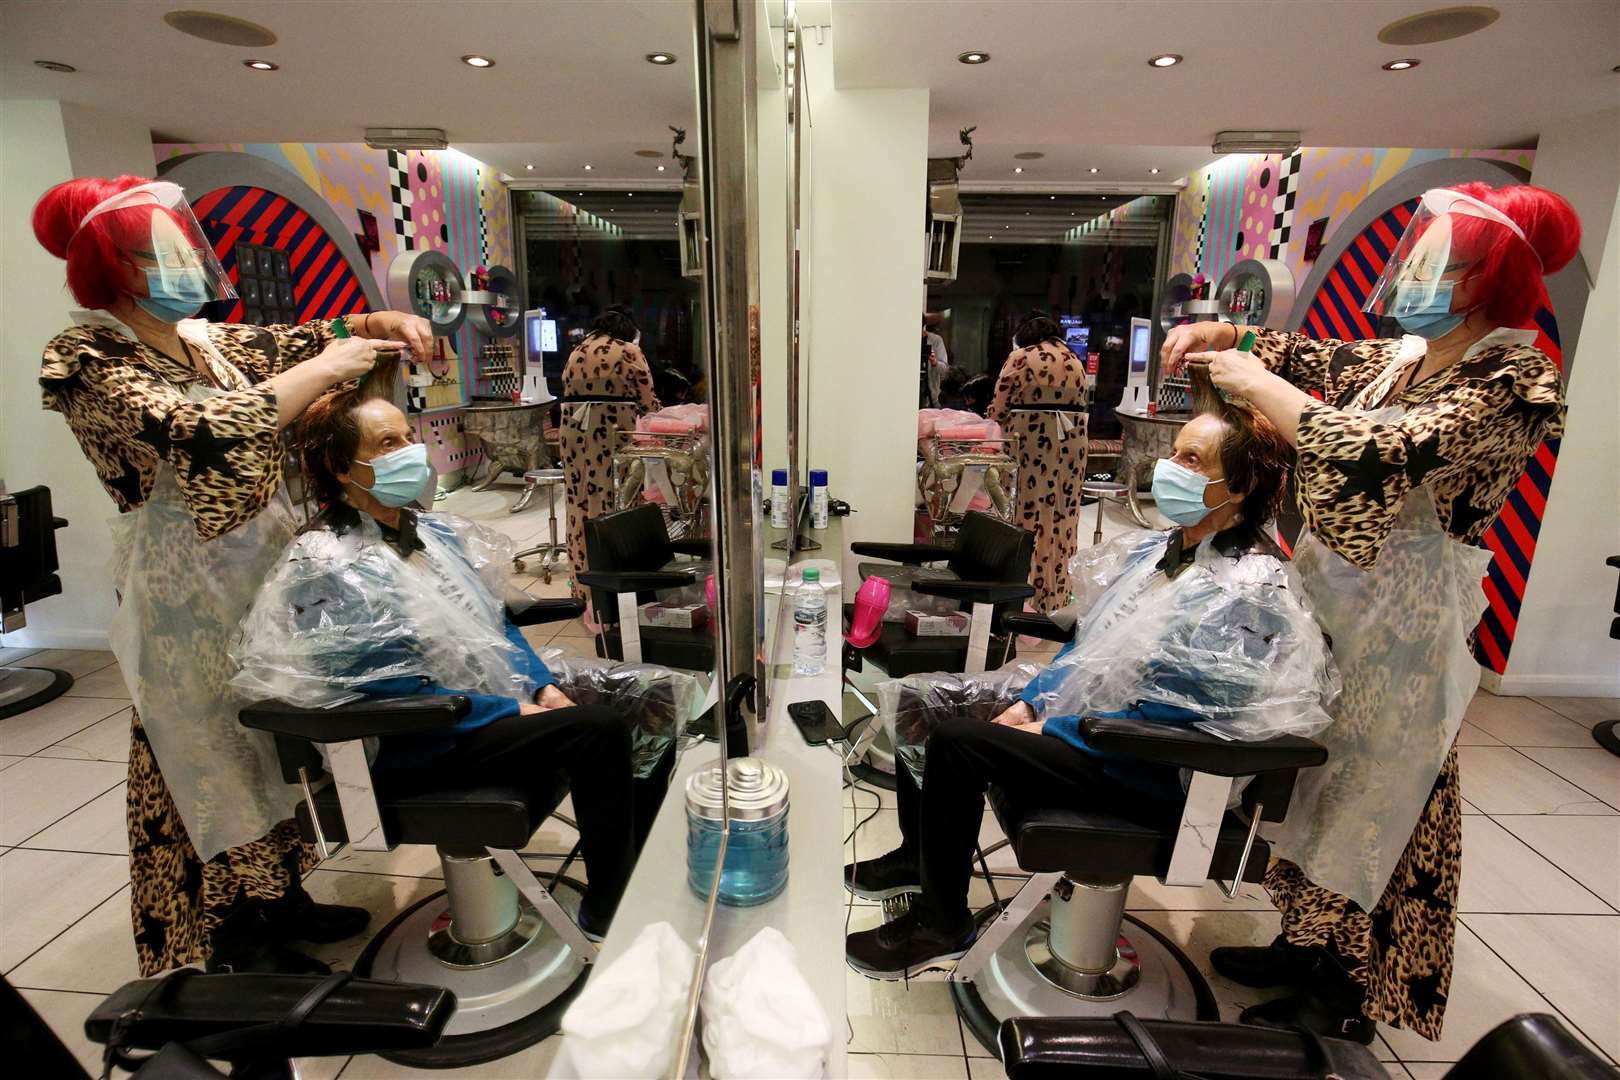 Carole Rickaby cuts the hair of customer Sandra Jacobs at Tusk Hair in Camden, north London, after opening at midnight as the first lockdown restrictions were eased in England (Jonathan Brady/PA)